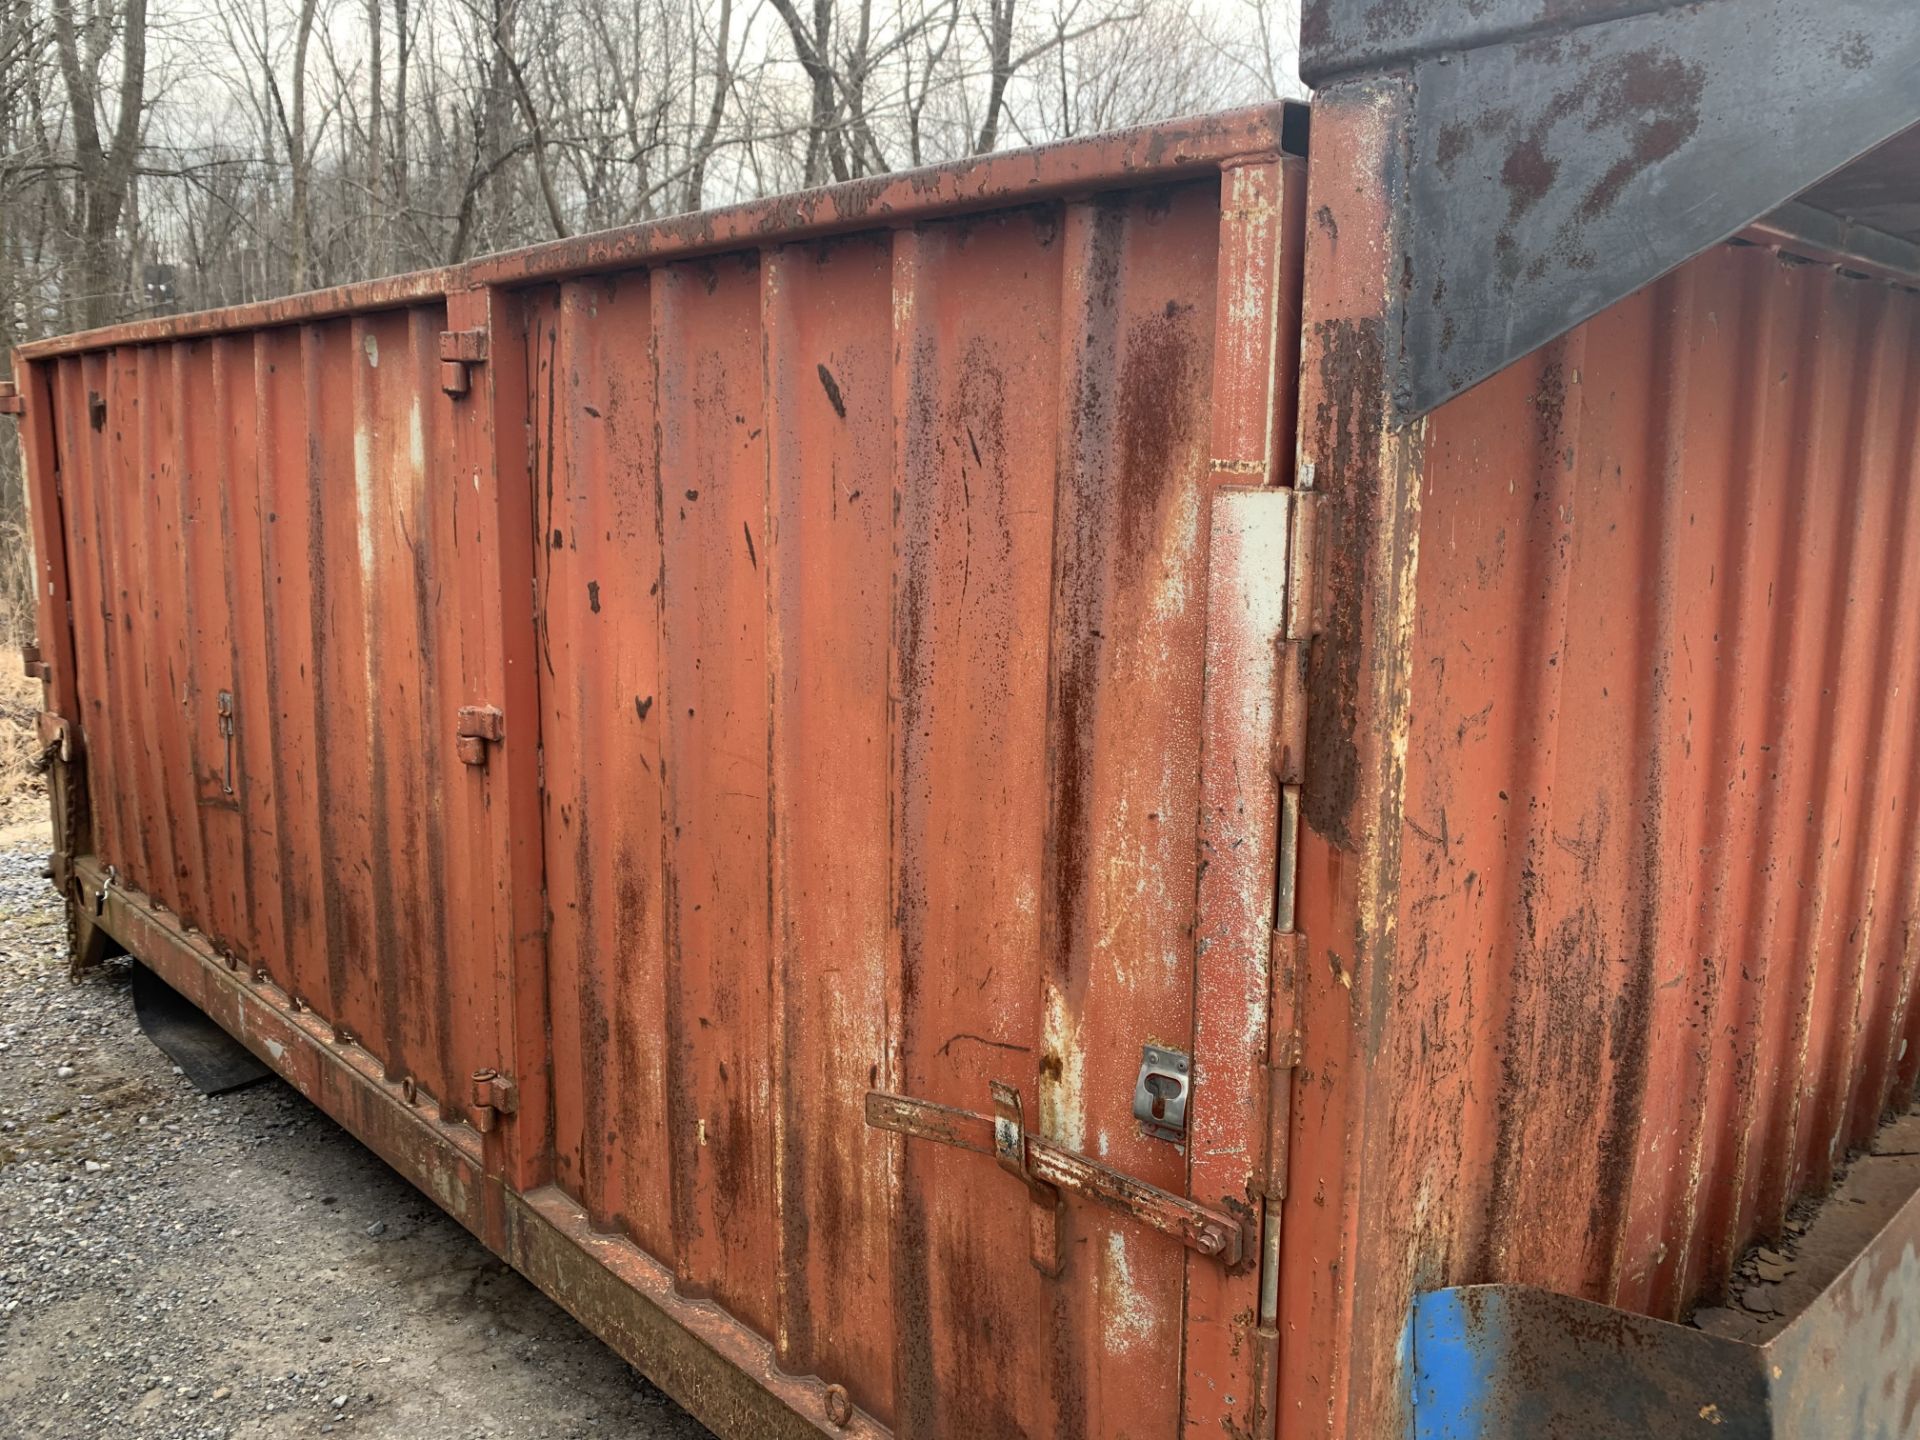 6 Yard Dump Truck Bed - Image 3 of 4